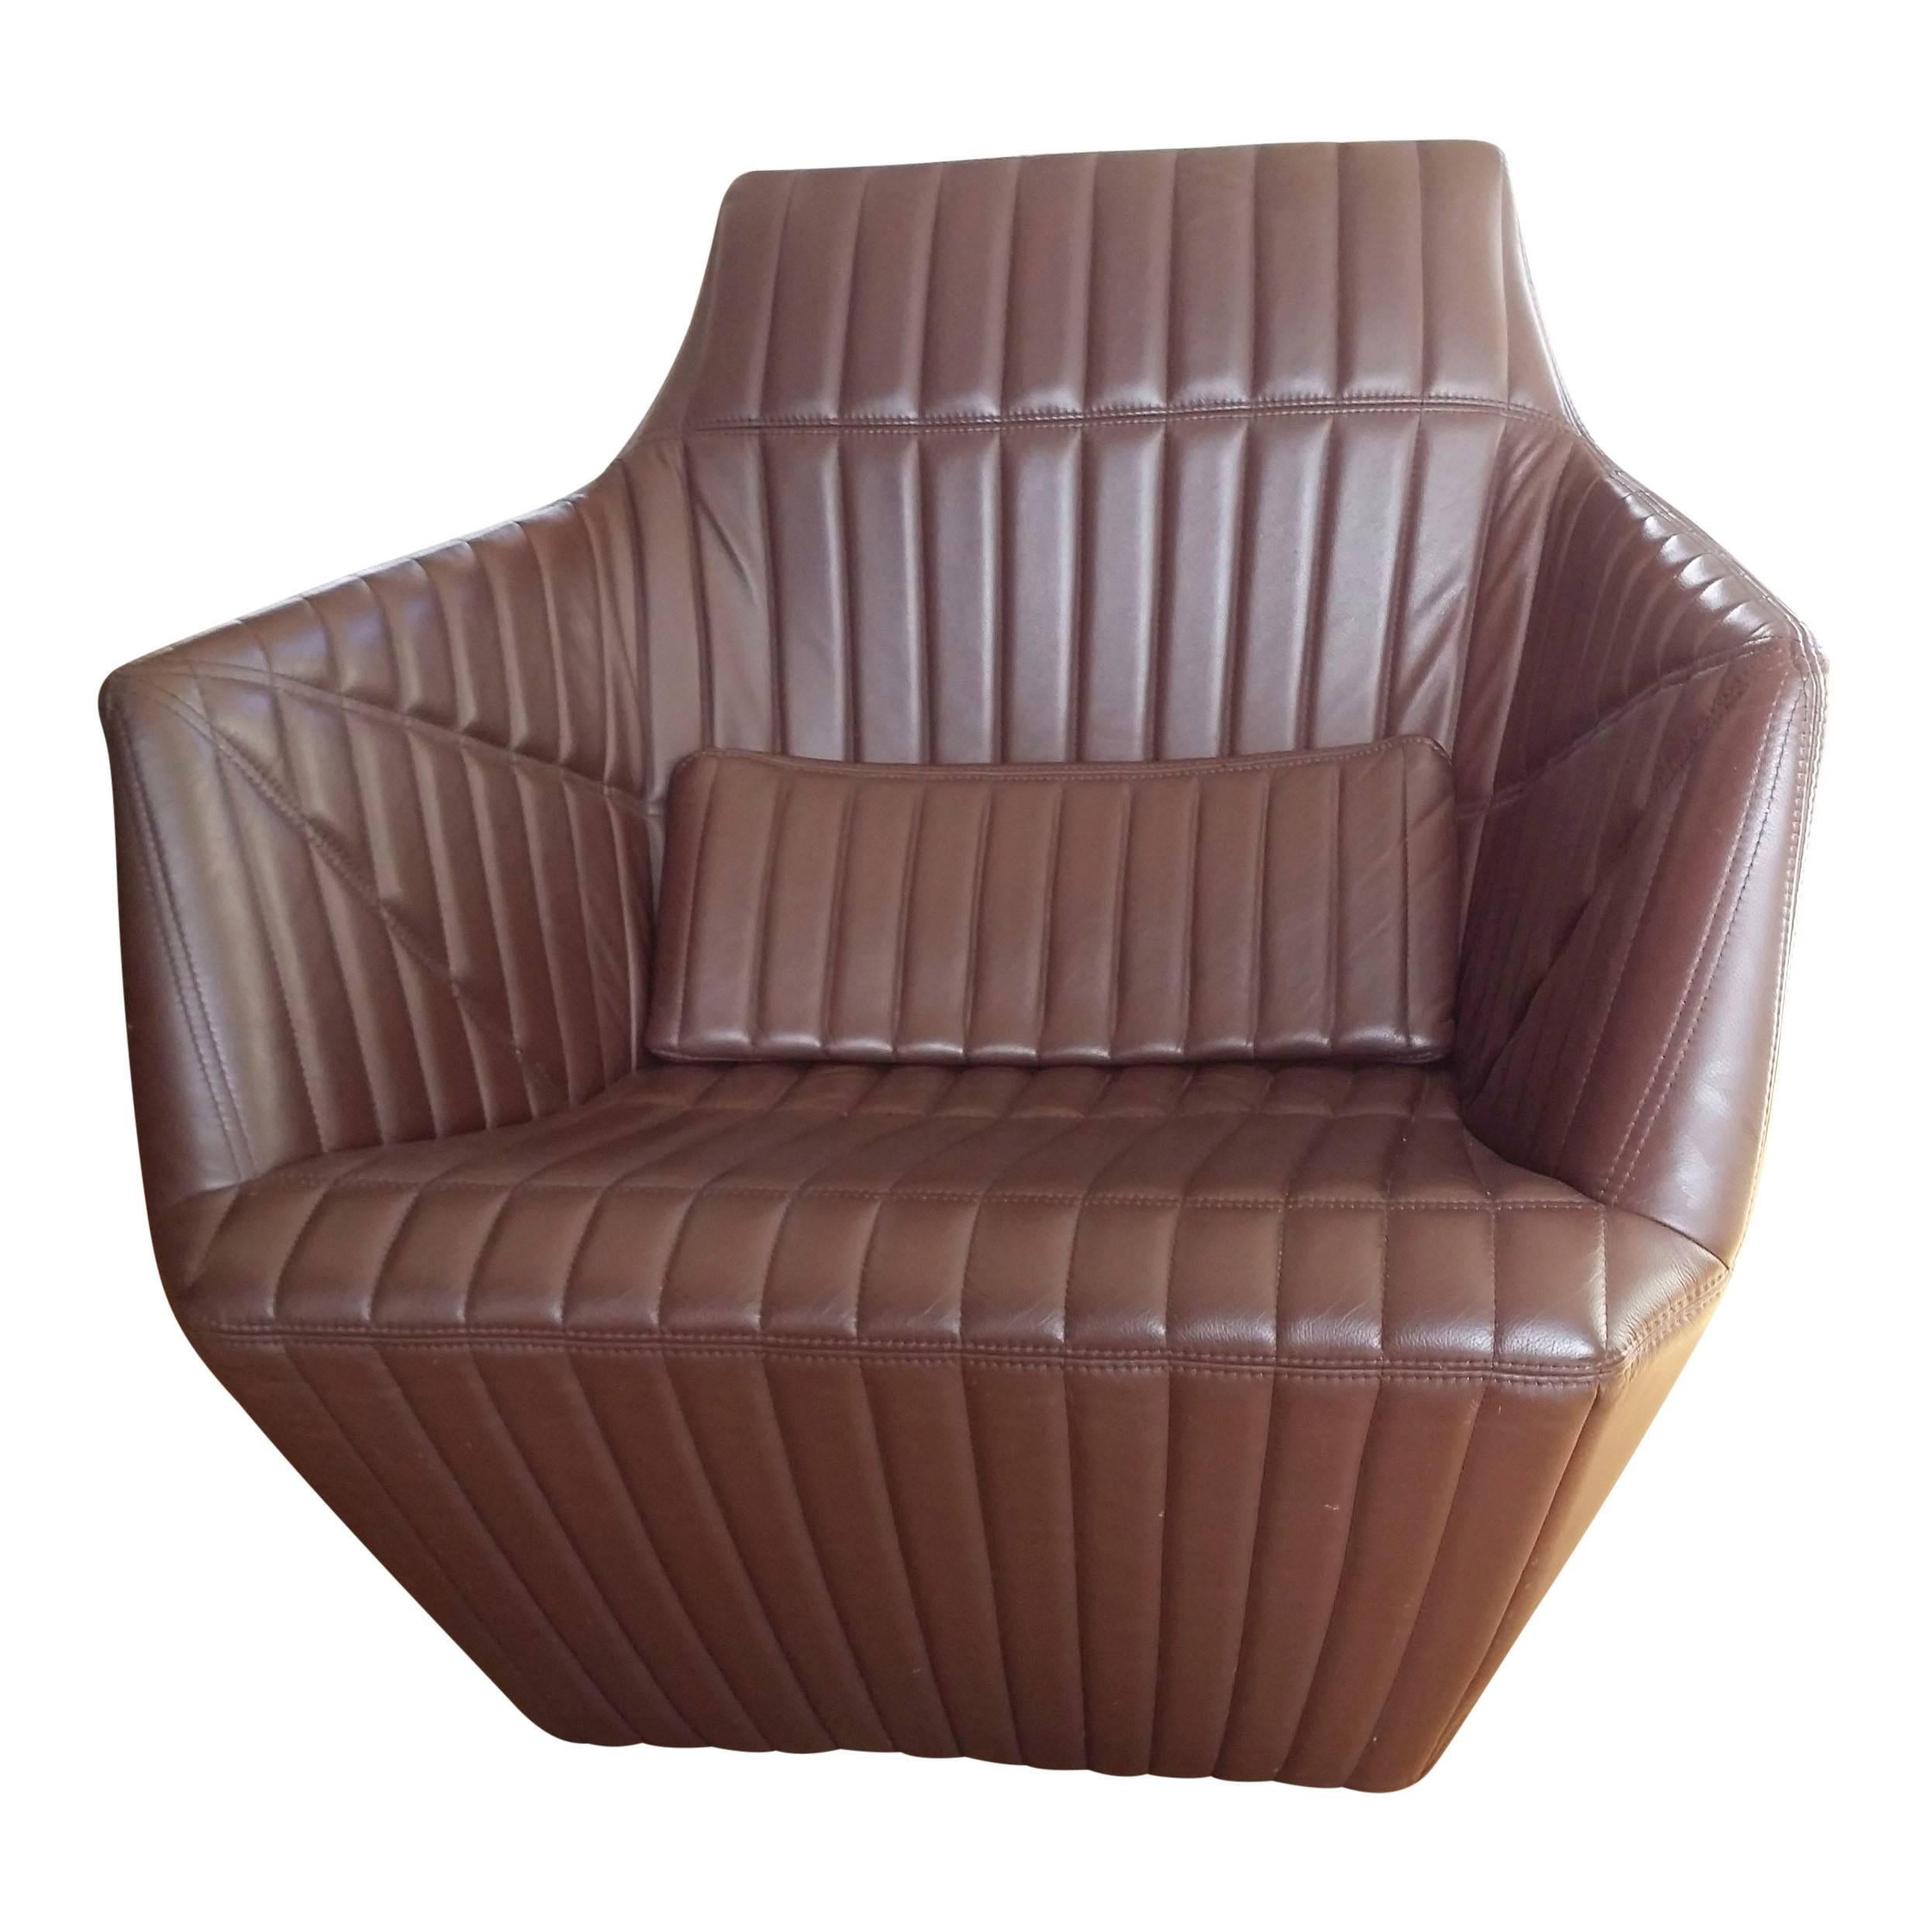 Rare über comfortable modernist armchair by Bouroullec brothers for Editions Ligne Roset.
Pristine condition.
Dark chocolate leather original upholstery
matching ottoman.

Construction: 
Three layers of criss-cross panels and thermoformed